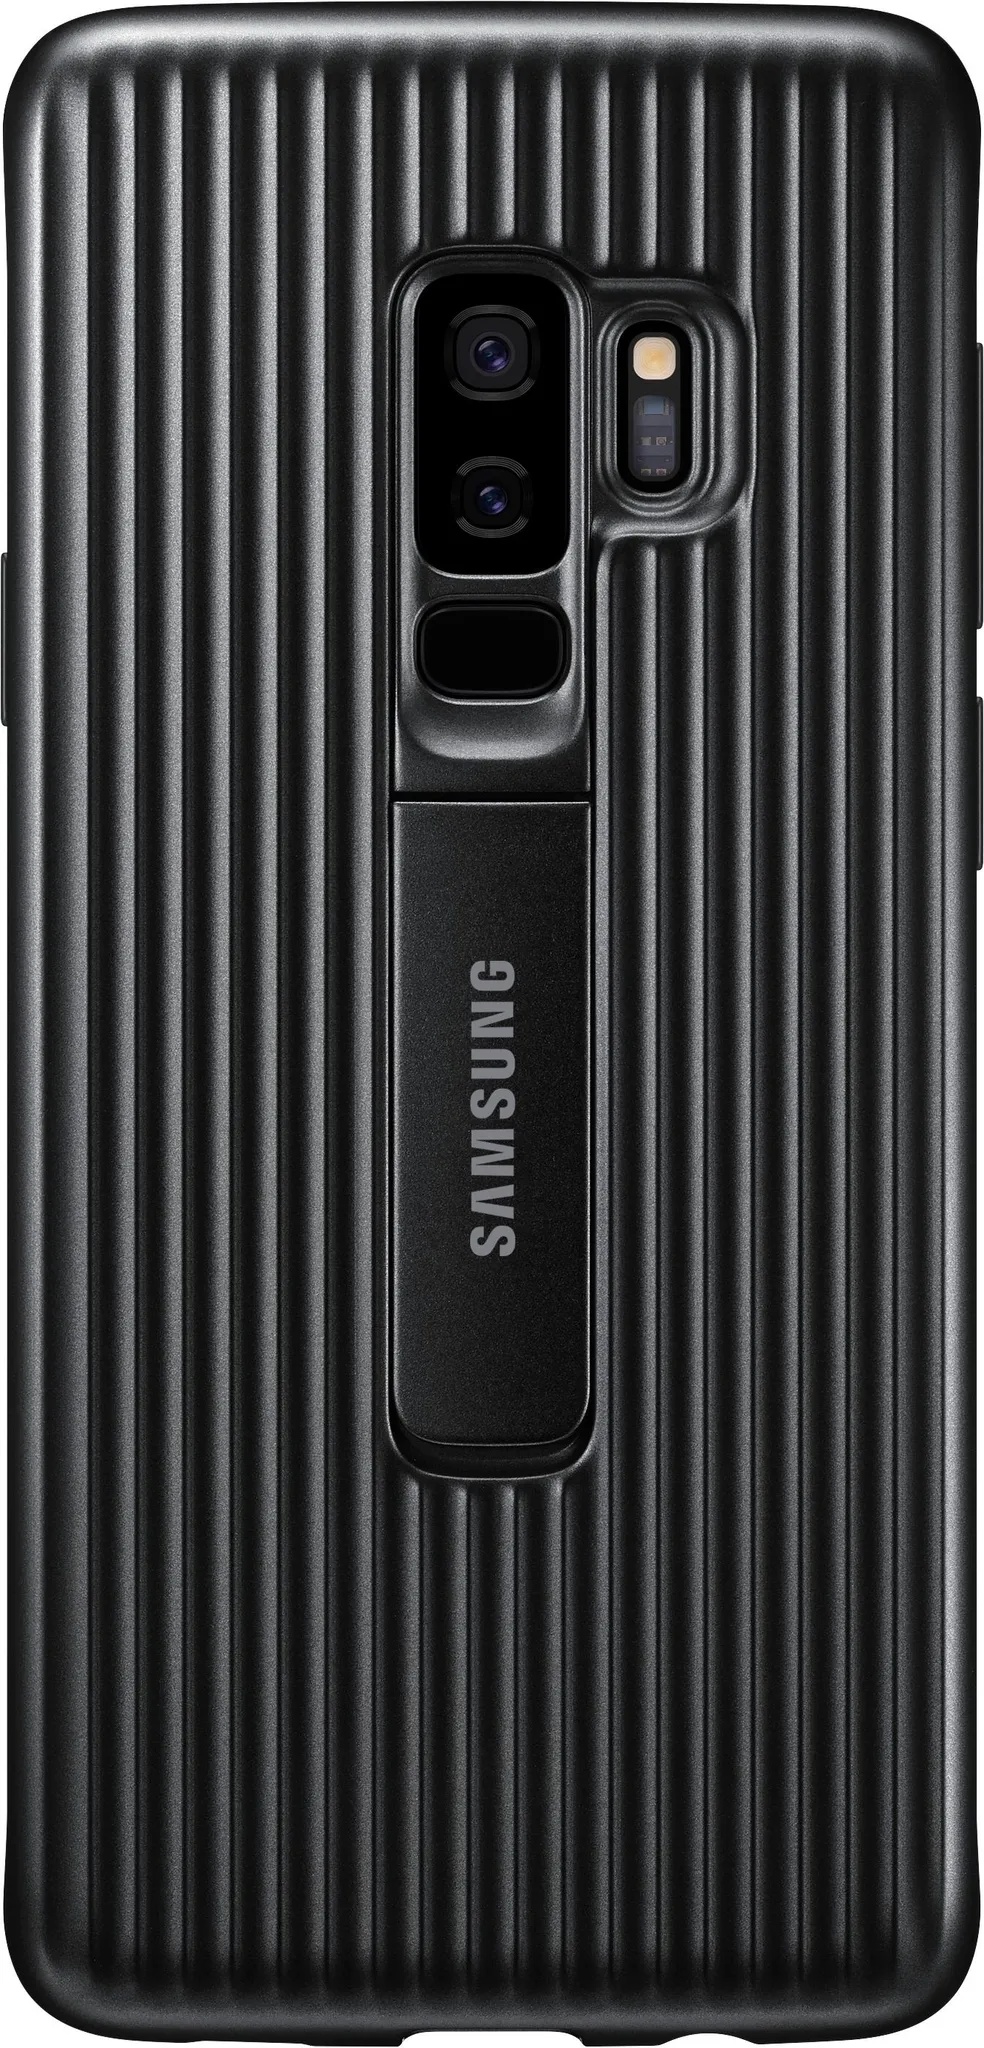 Samsung Protective Standing Cover (Galaxy S9+), Smartphone Hülle, Schwarz